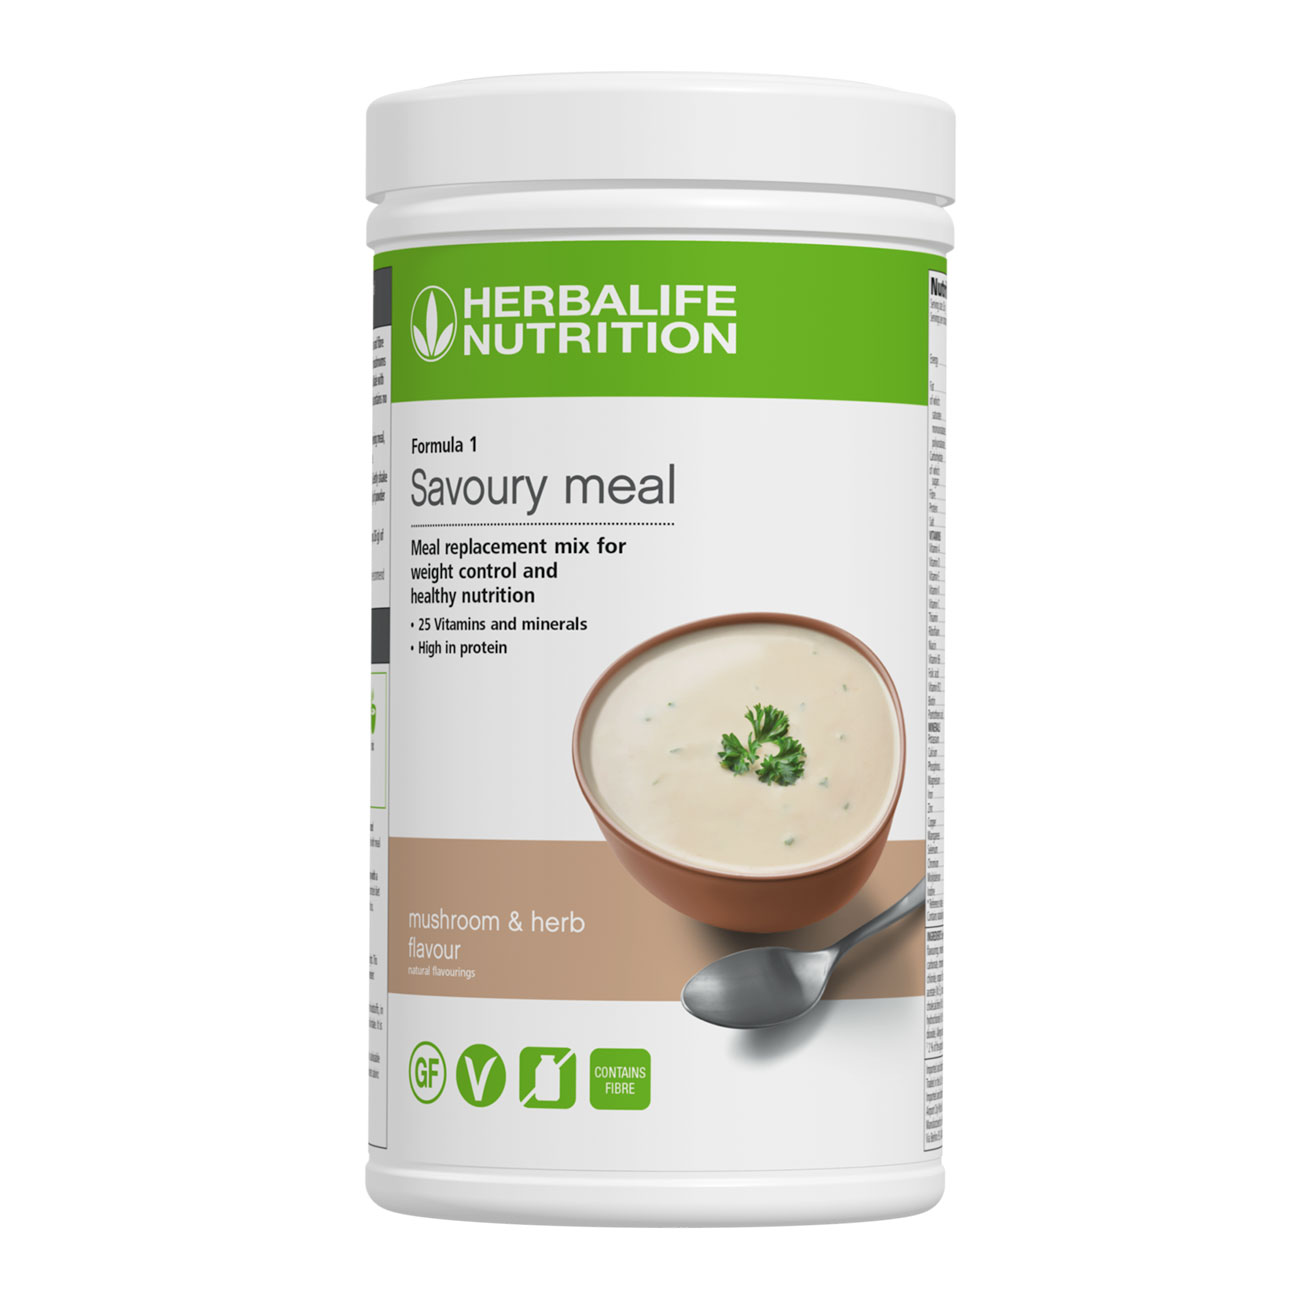 Try our Savoury Formula 1 in a Mushroom and Herb flavour. Enjoyed as a nutritional lunch or evening meal and it is vegetarian, high in protein and gluten-free with no added sugar.